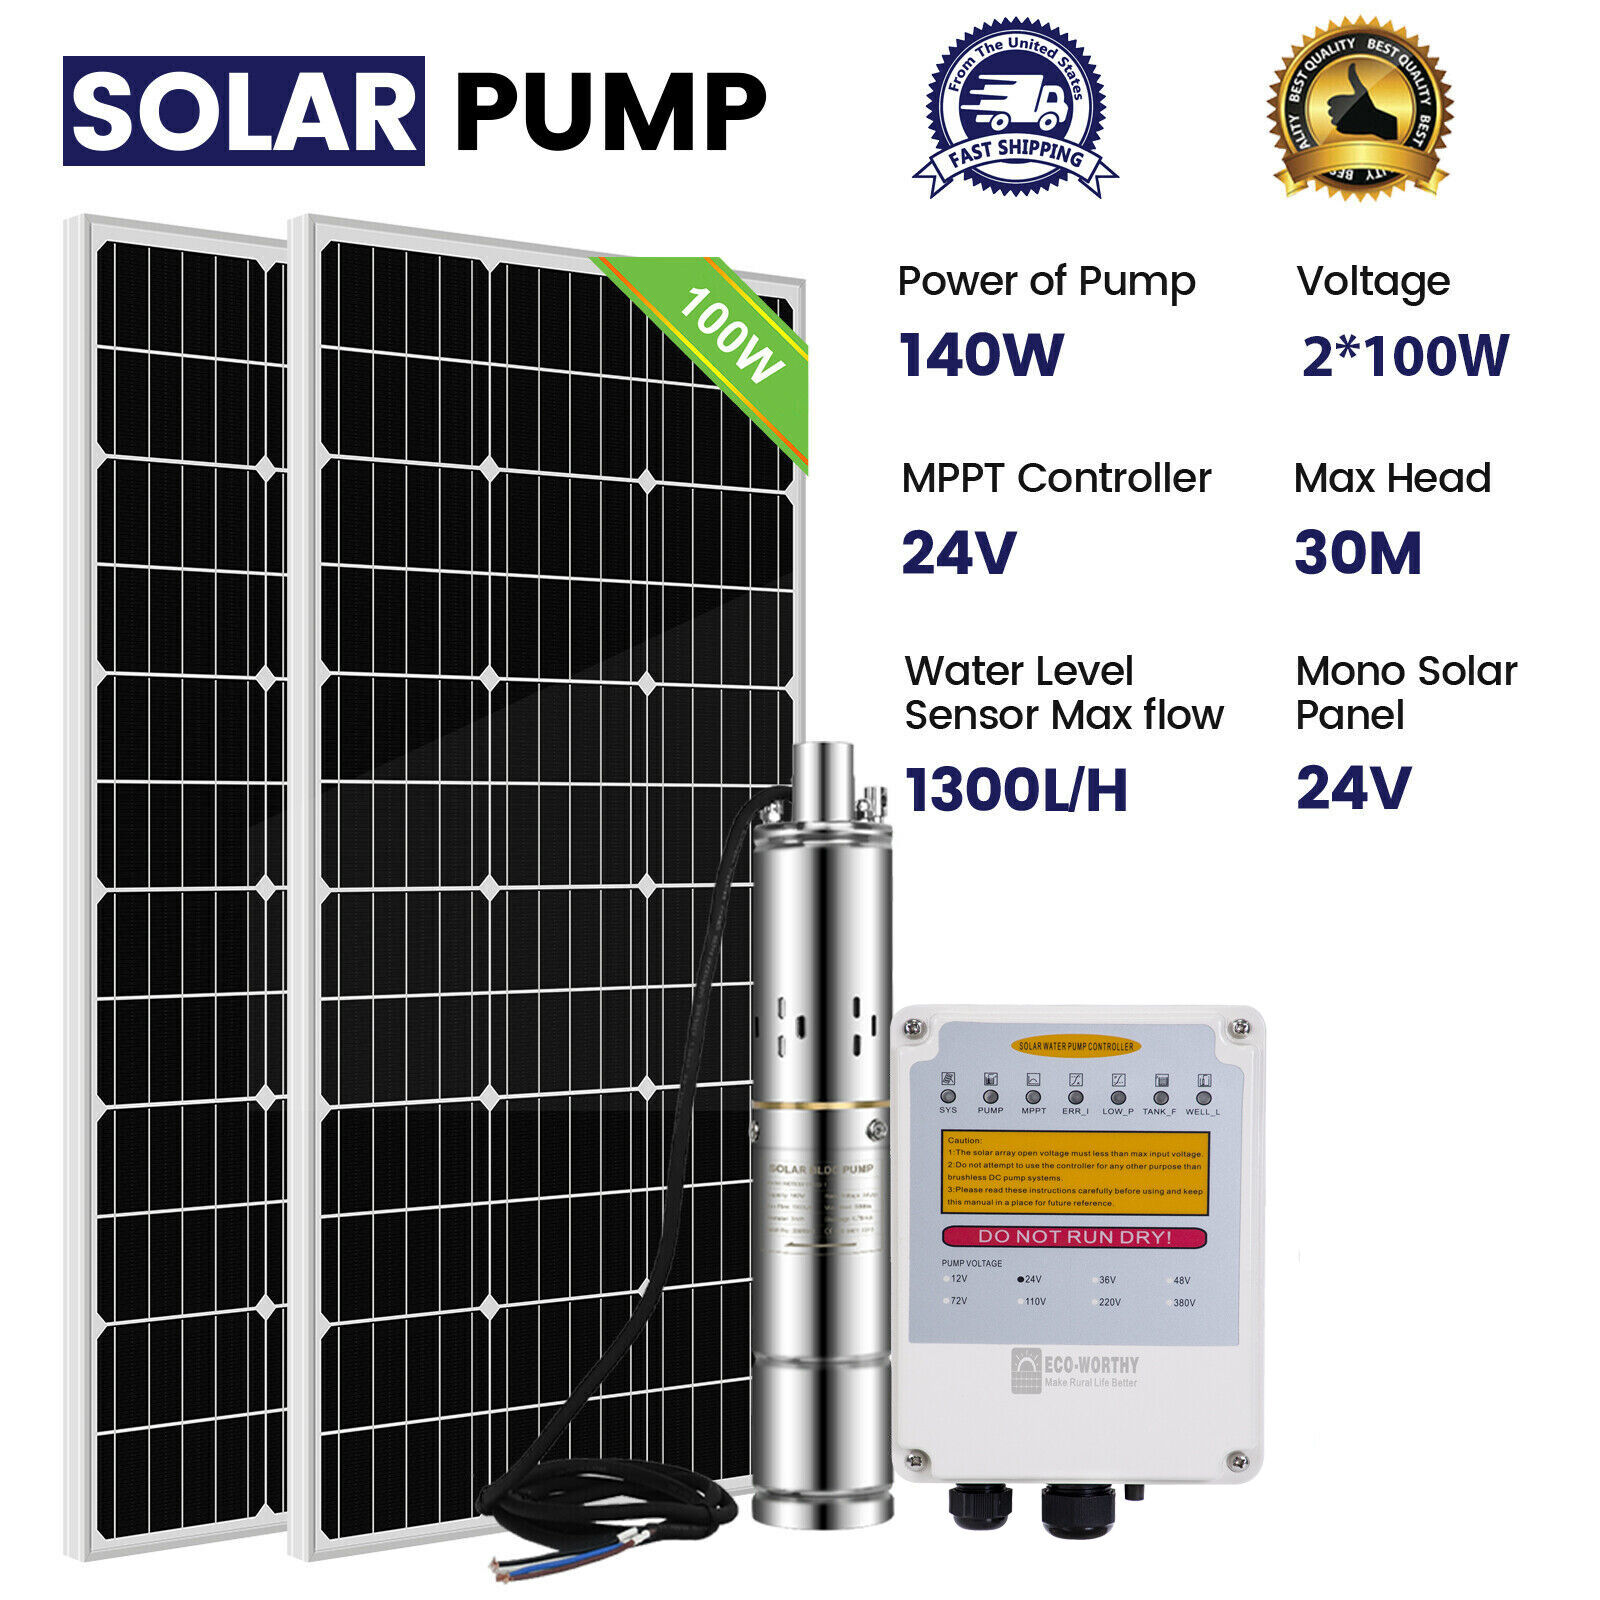 DC 24V Submersible Solar Well Pump Kit 3'' Solar Water Pump 164ft 5.7gpm MPPT